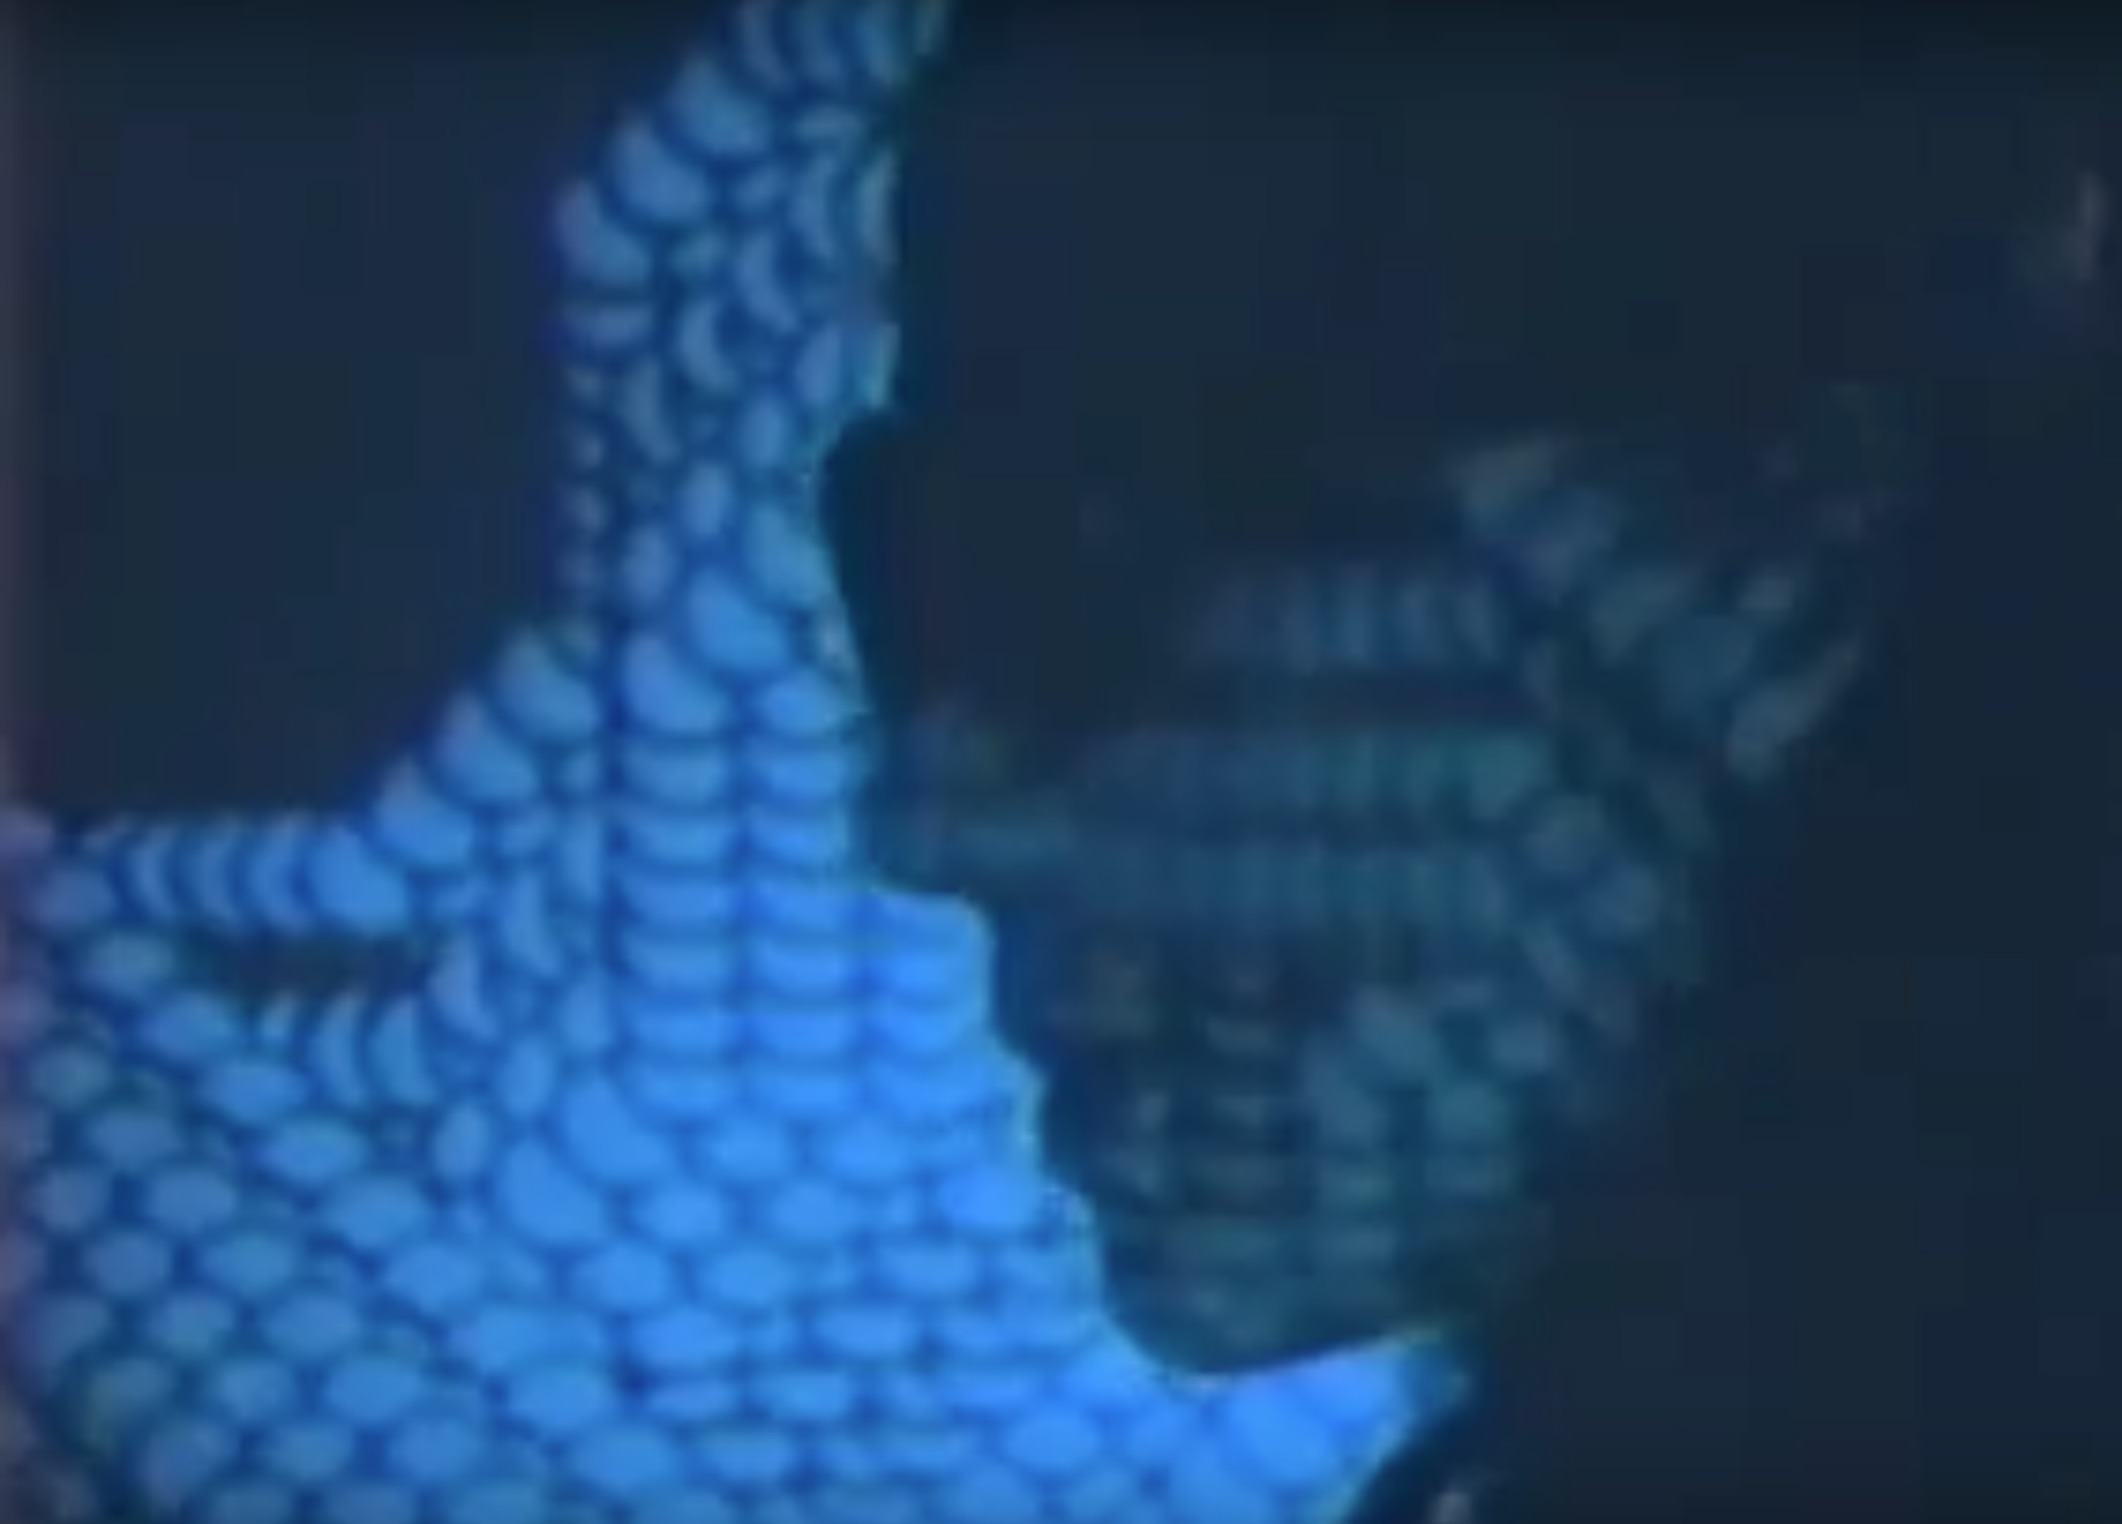 Profile of a womans face lit by projected computer graphics